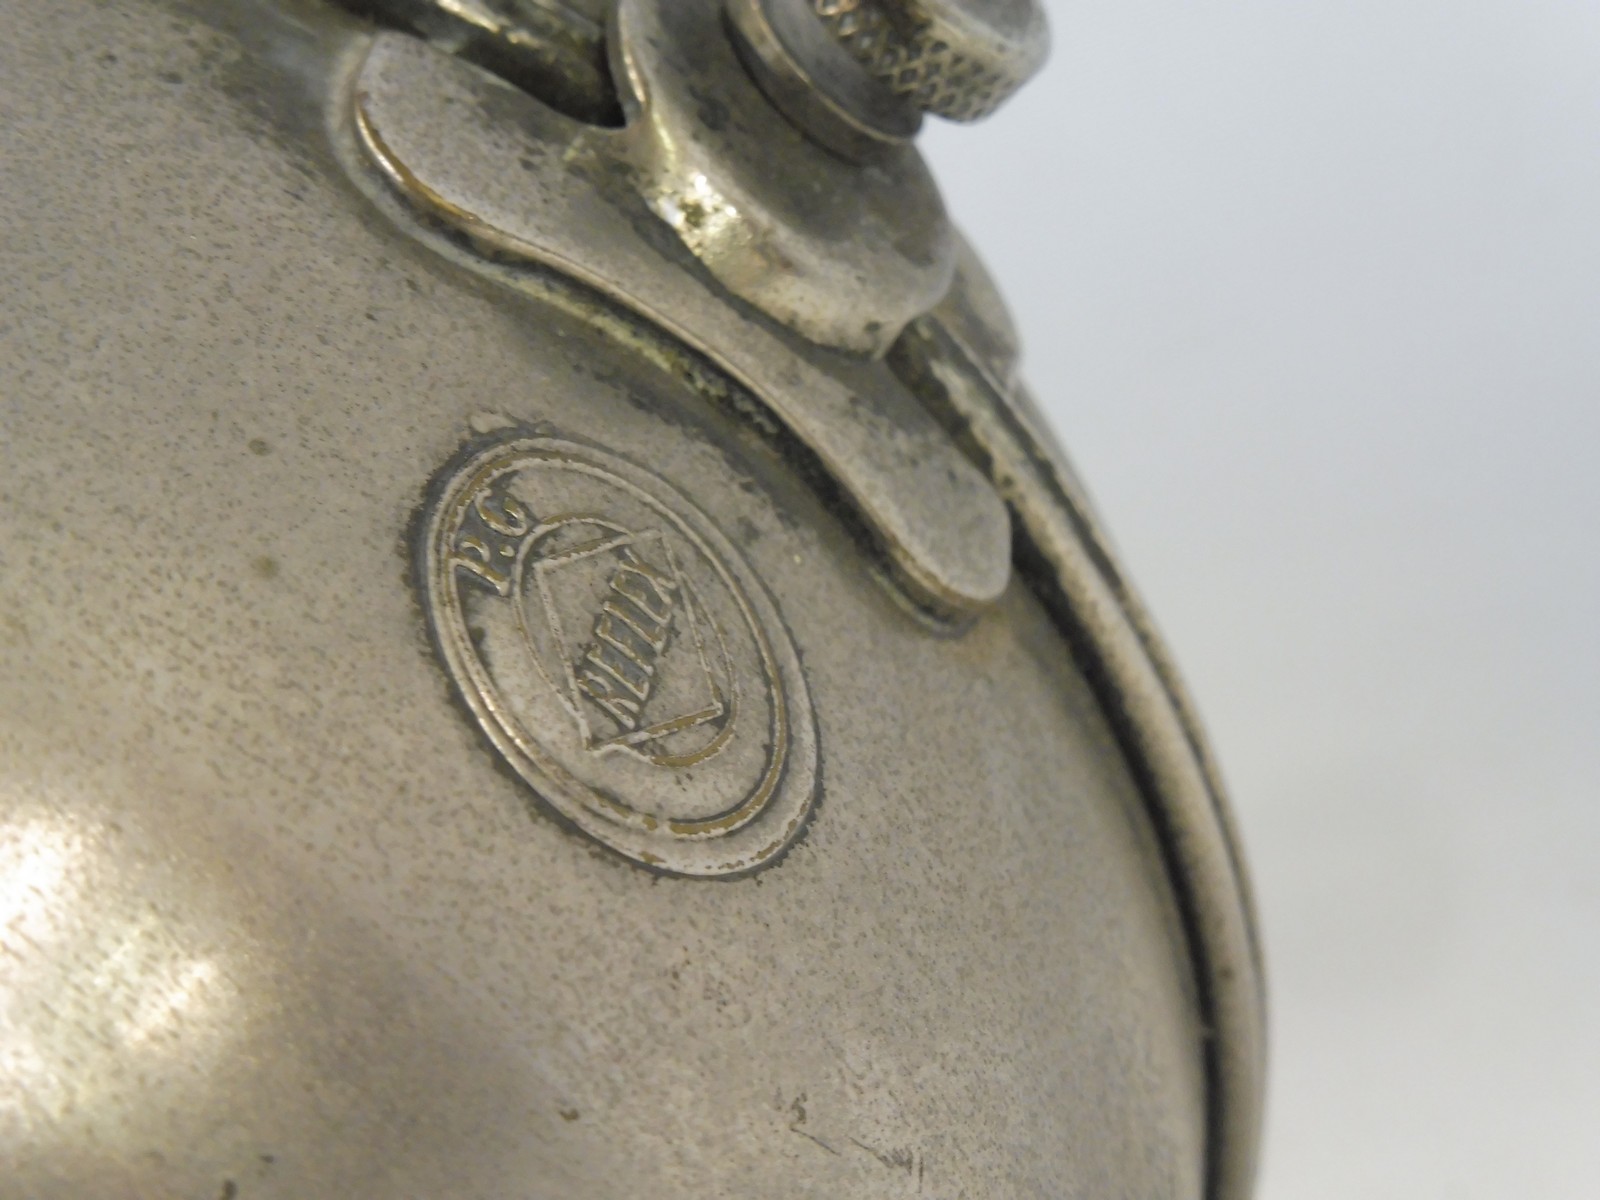 An early French nickel plated spot lamp marked Phares Auteroche Reflex. - Image 4 of 4